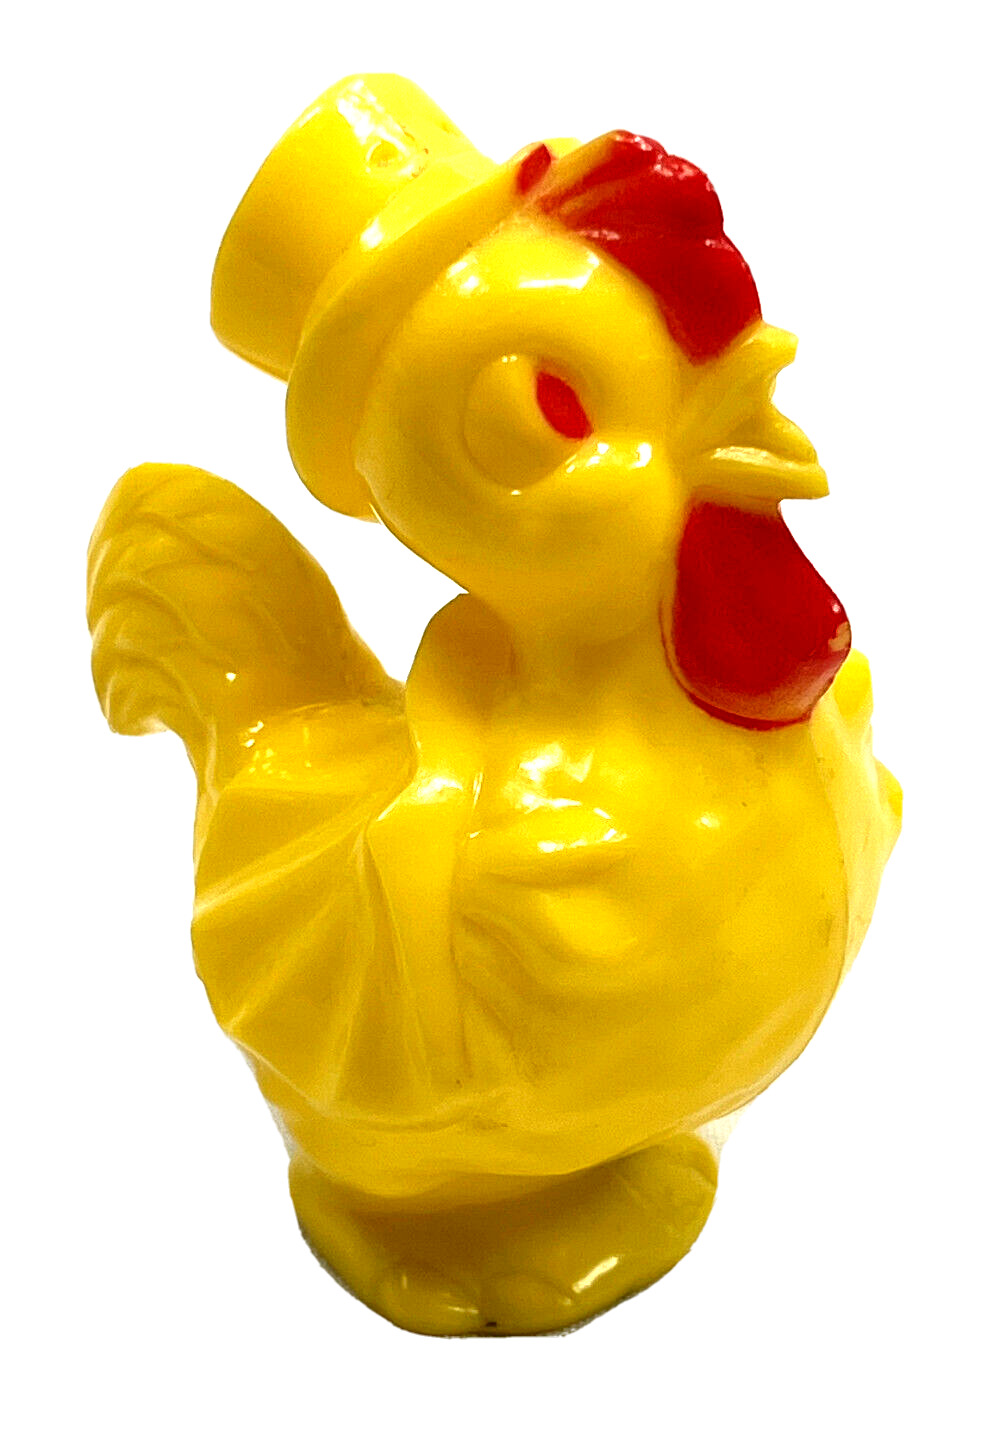 vtg Irwin rosbro Easter Rooster Chicken Rattle plastic toy candy container